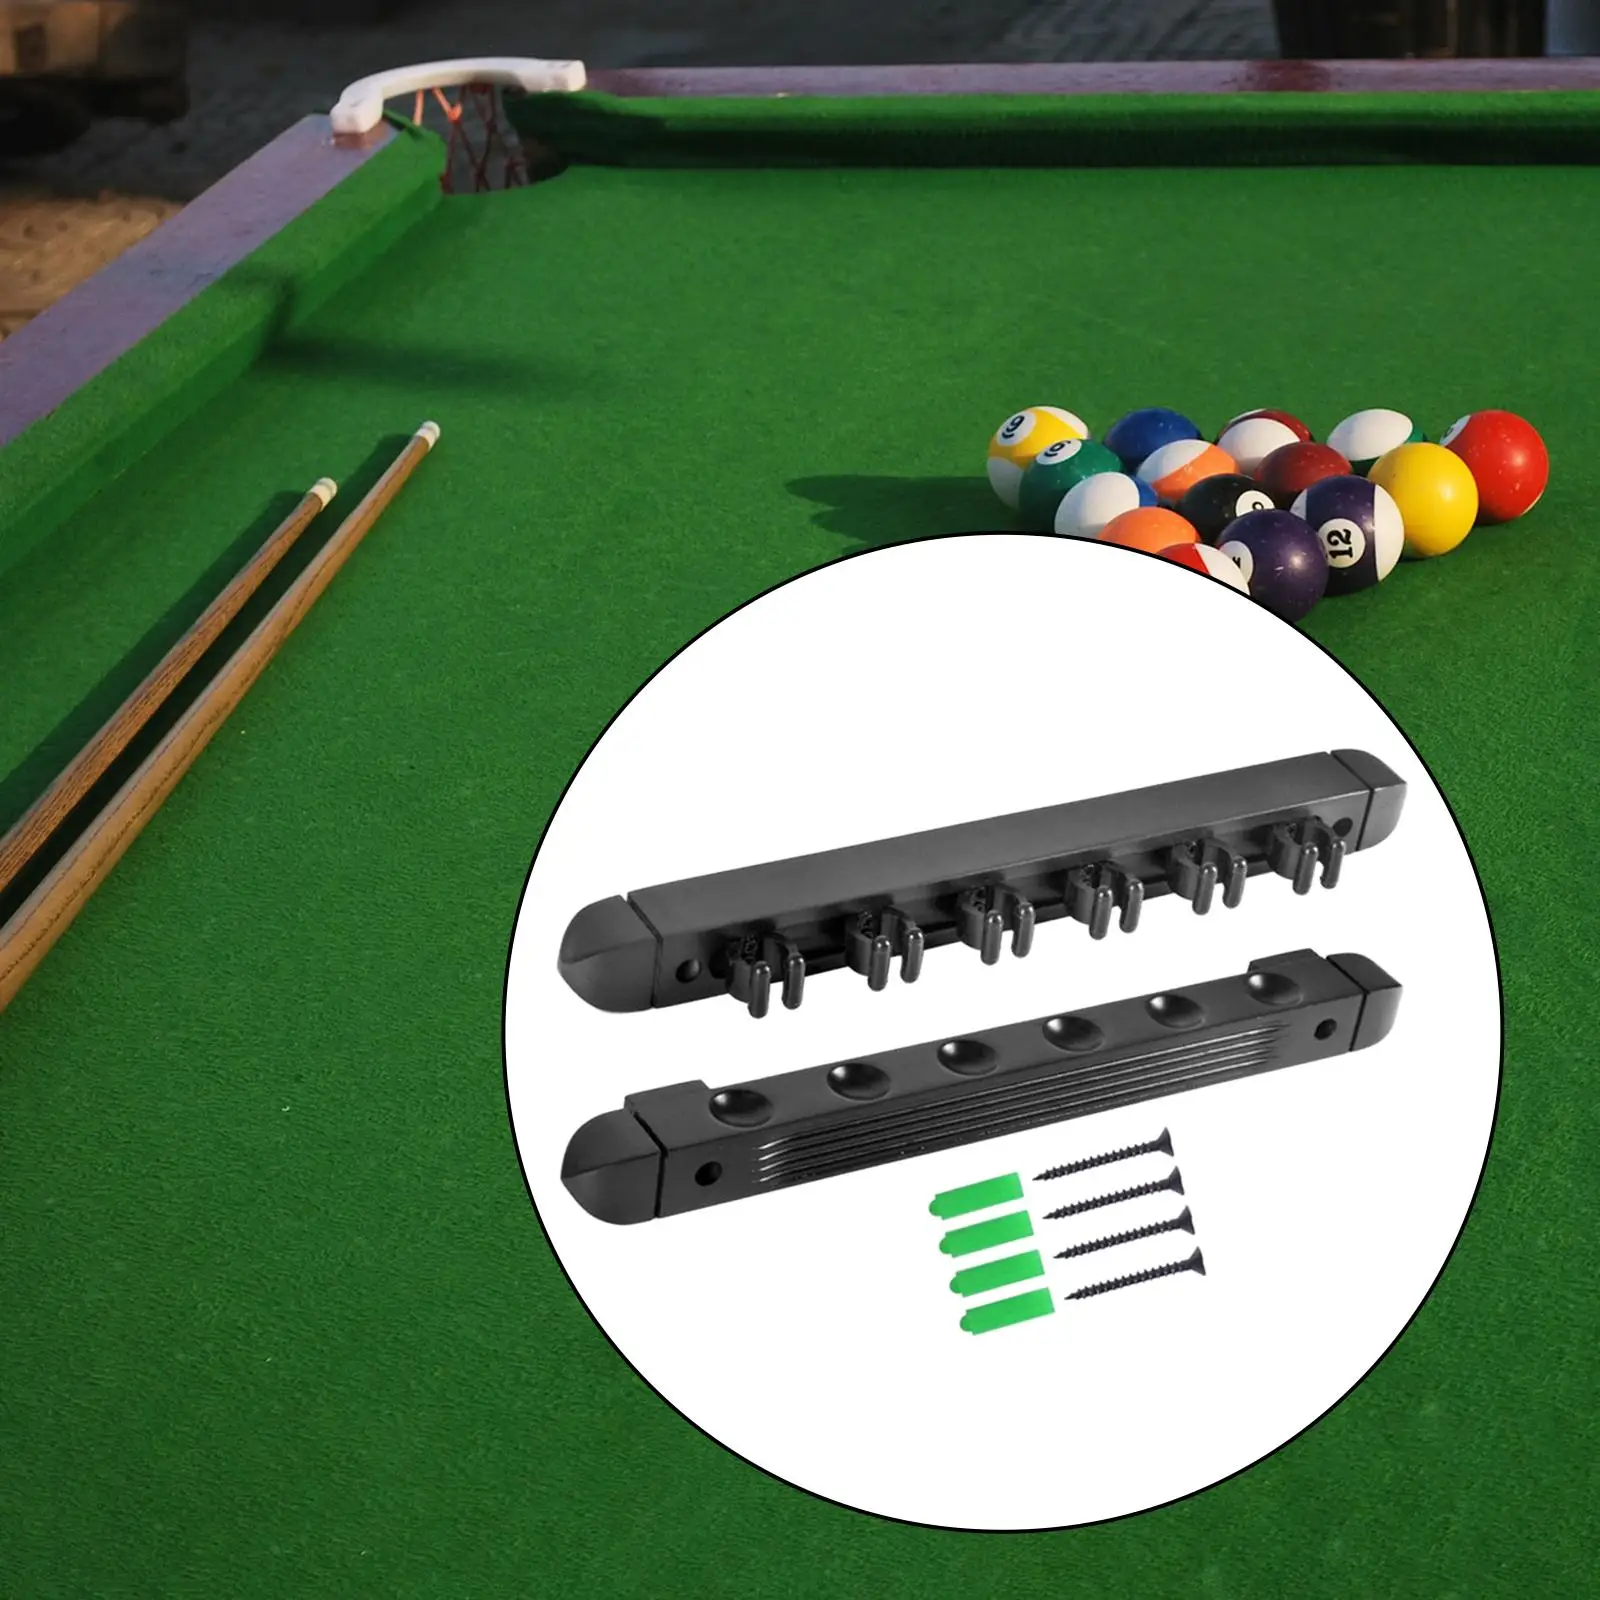 Wall Mount 6 Slot Billiards Snooker Stick Wooden Rack Pool Cue Holder Stand Pool Table Rods Organizer